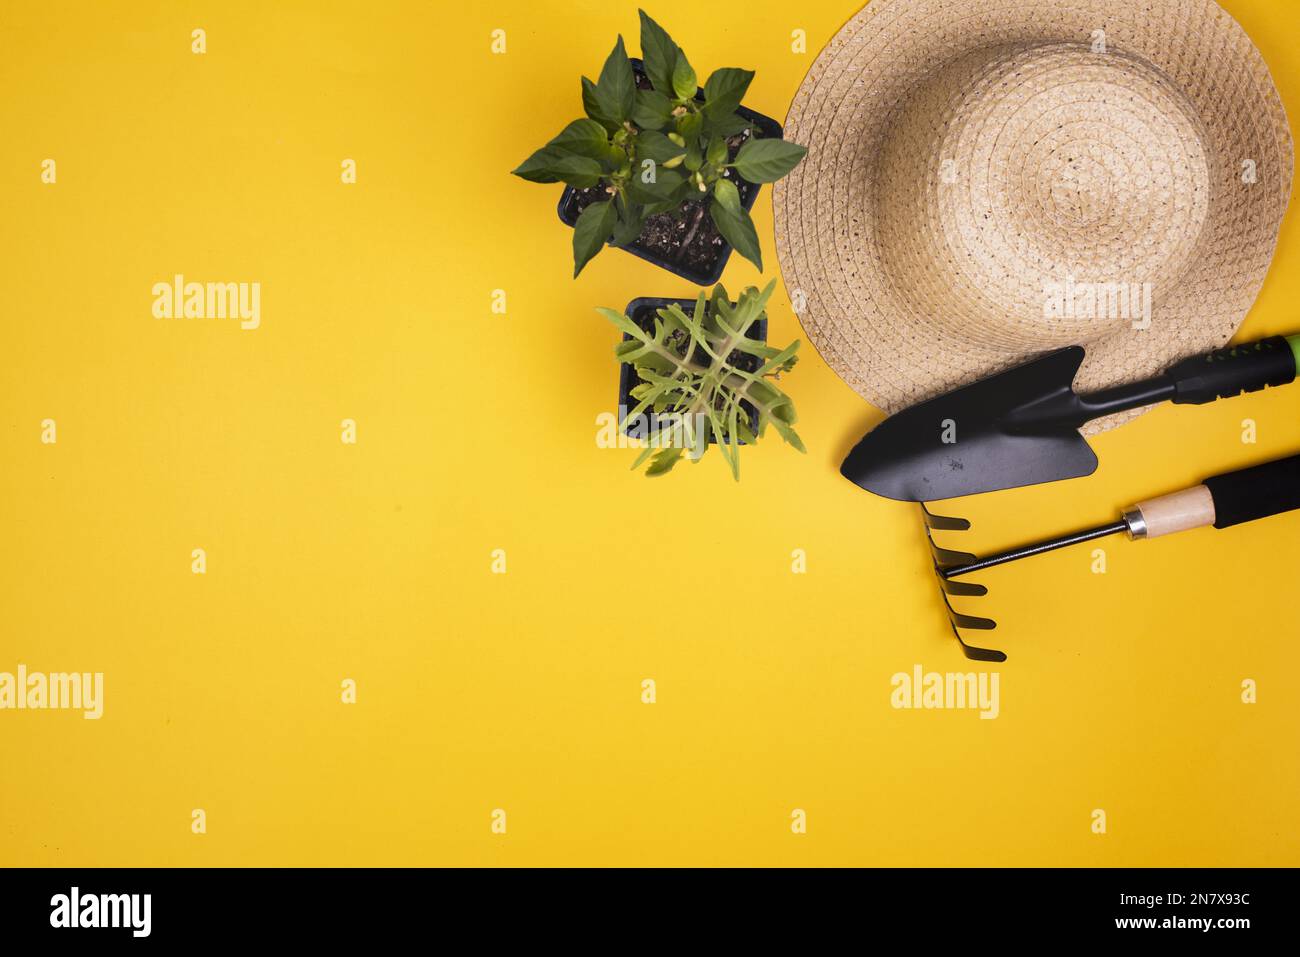 gardening tools with straw hat copy space Stock Photo